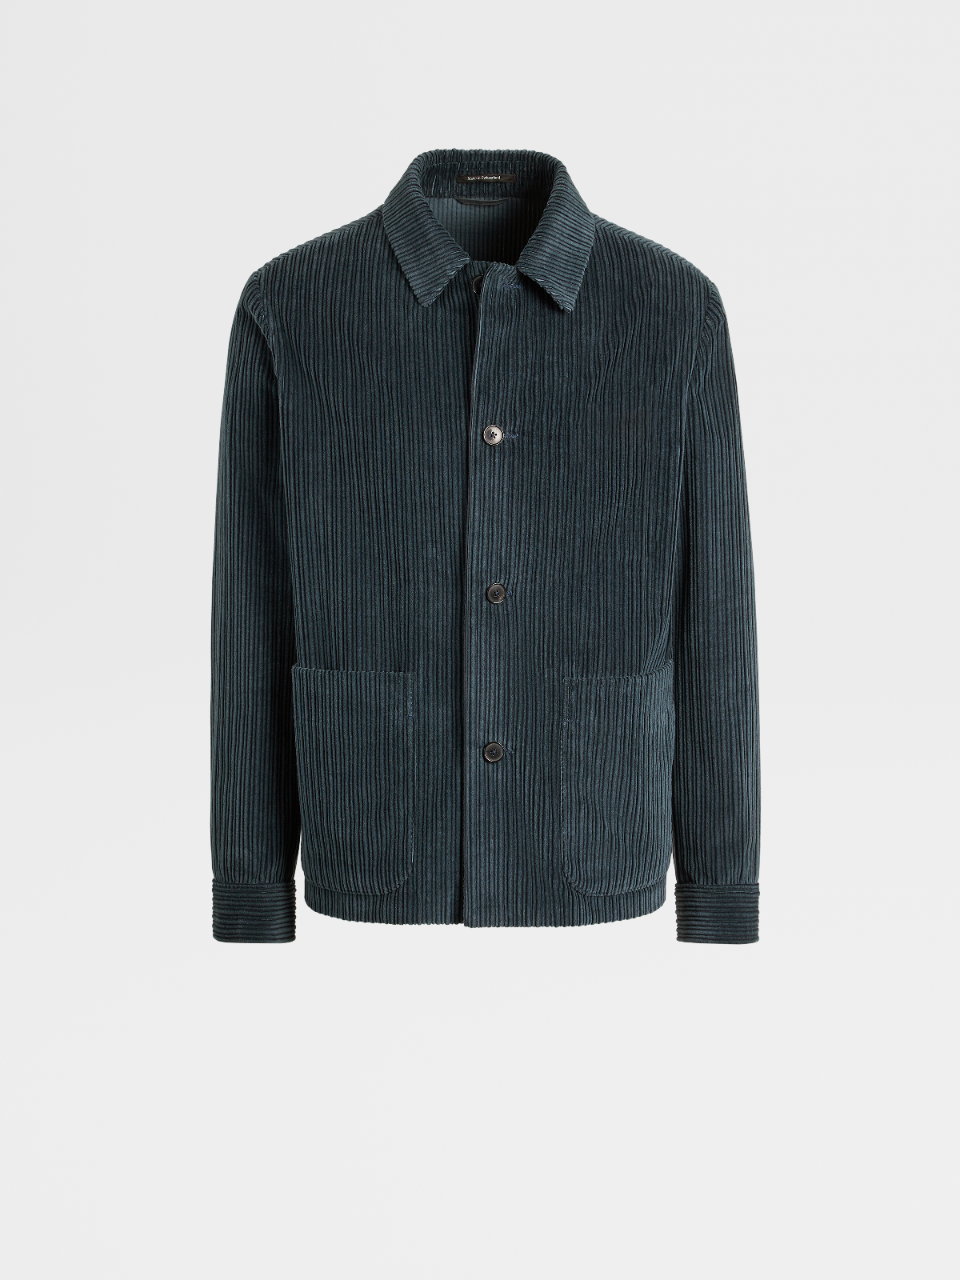 Teal Cashco Cotton and Cashmere Overshirt